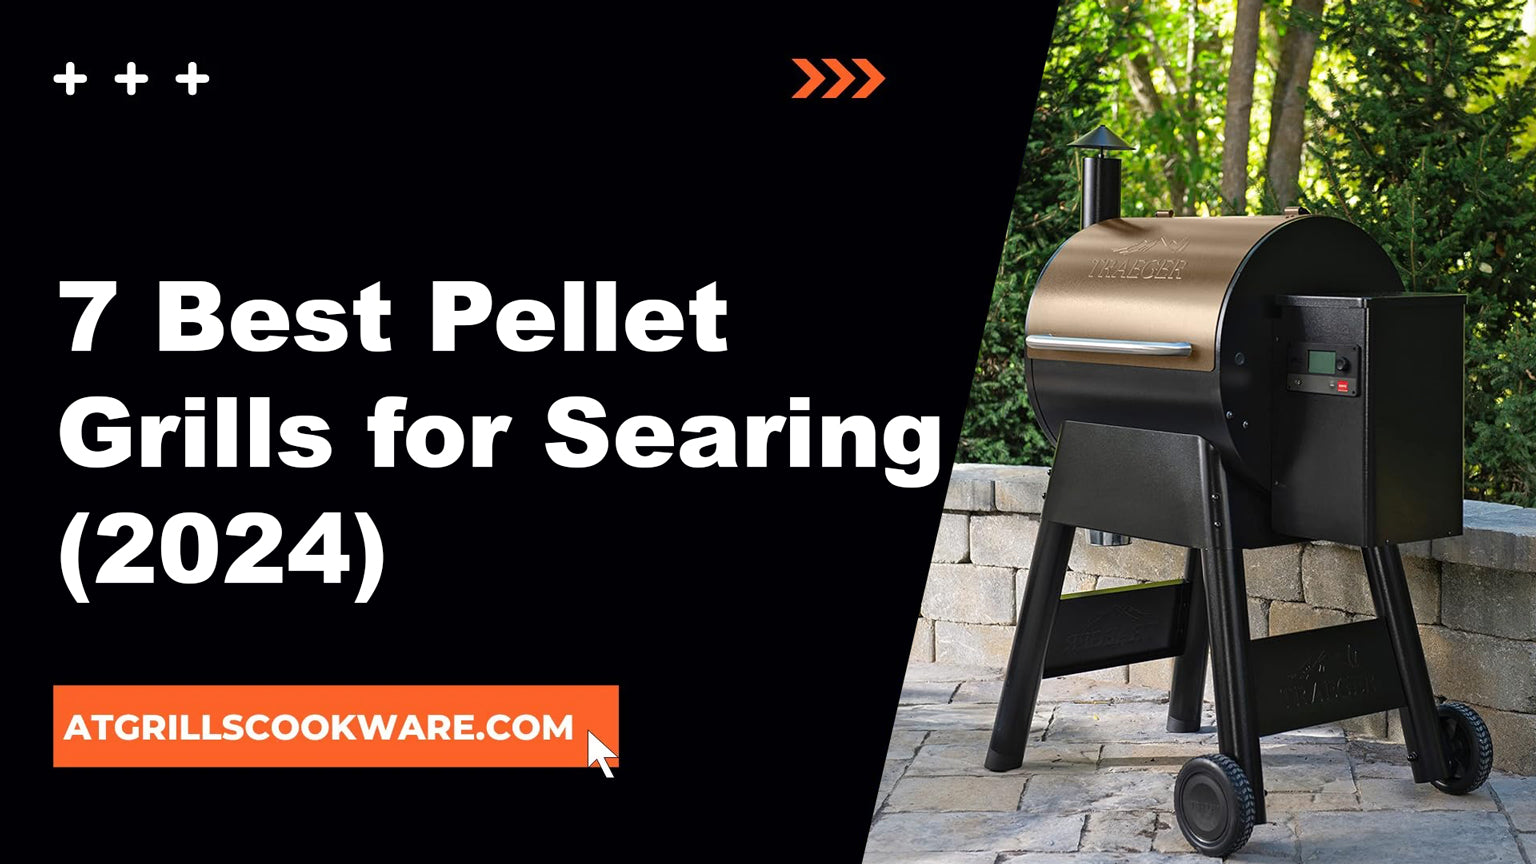 The 7 Best Pellet Grills for Searing (2024) Tested and Reviewed